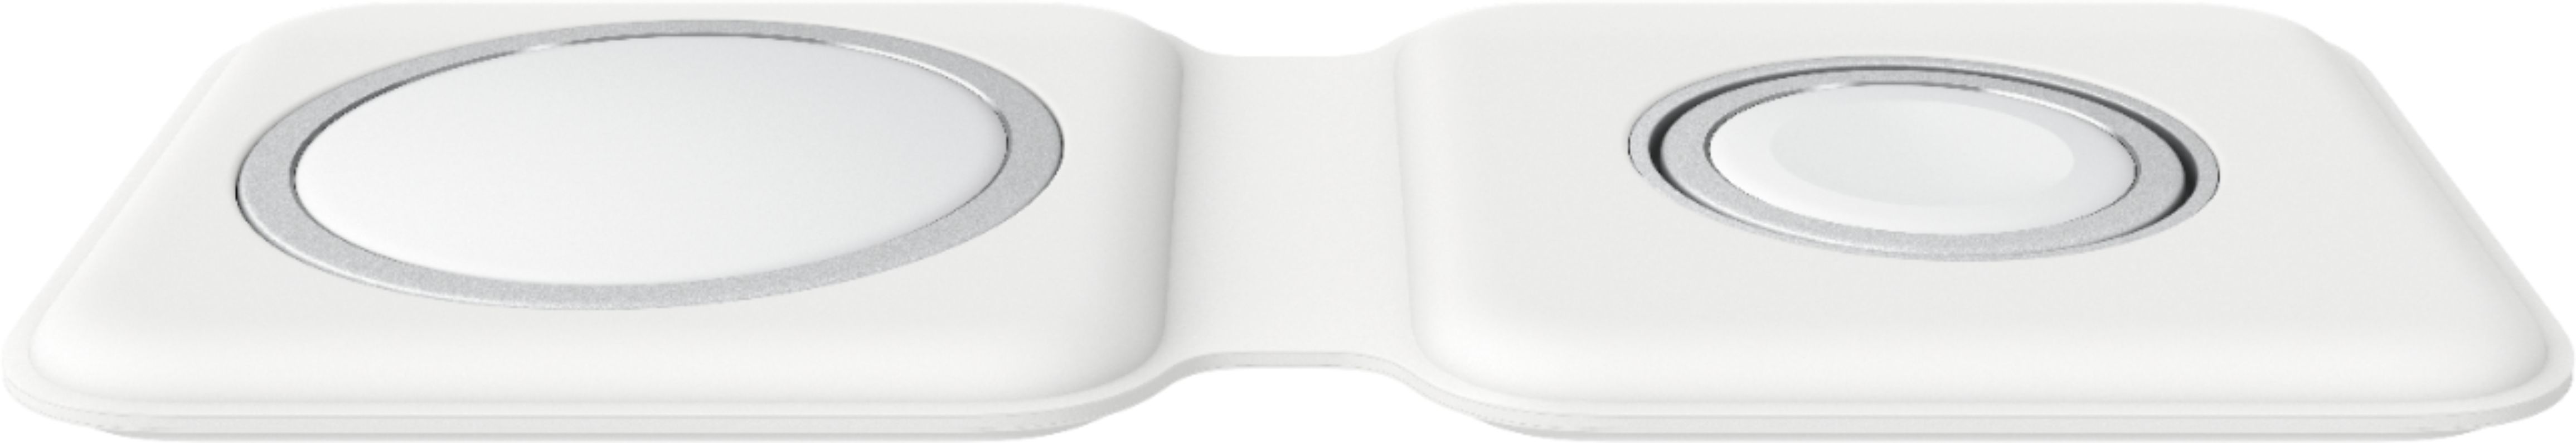 Apple - MagSafe Duo Charger - White for $99.99+FS